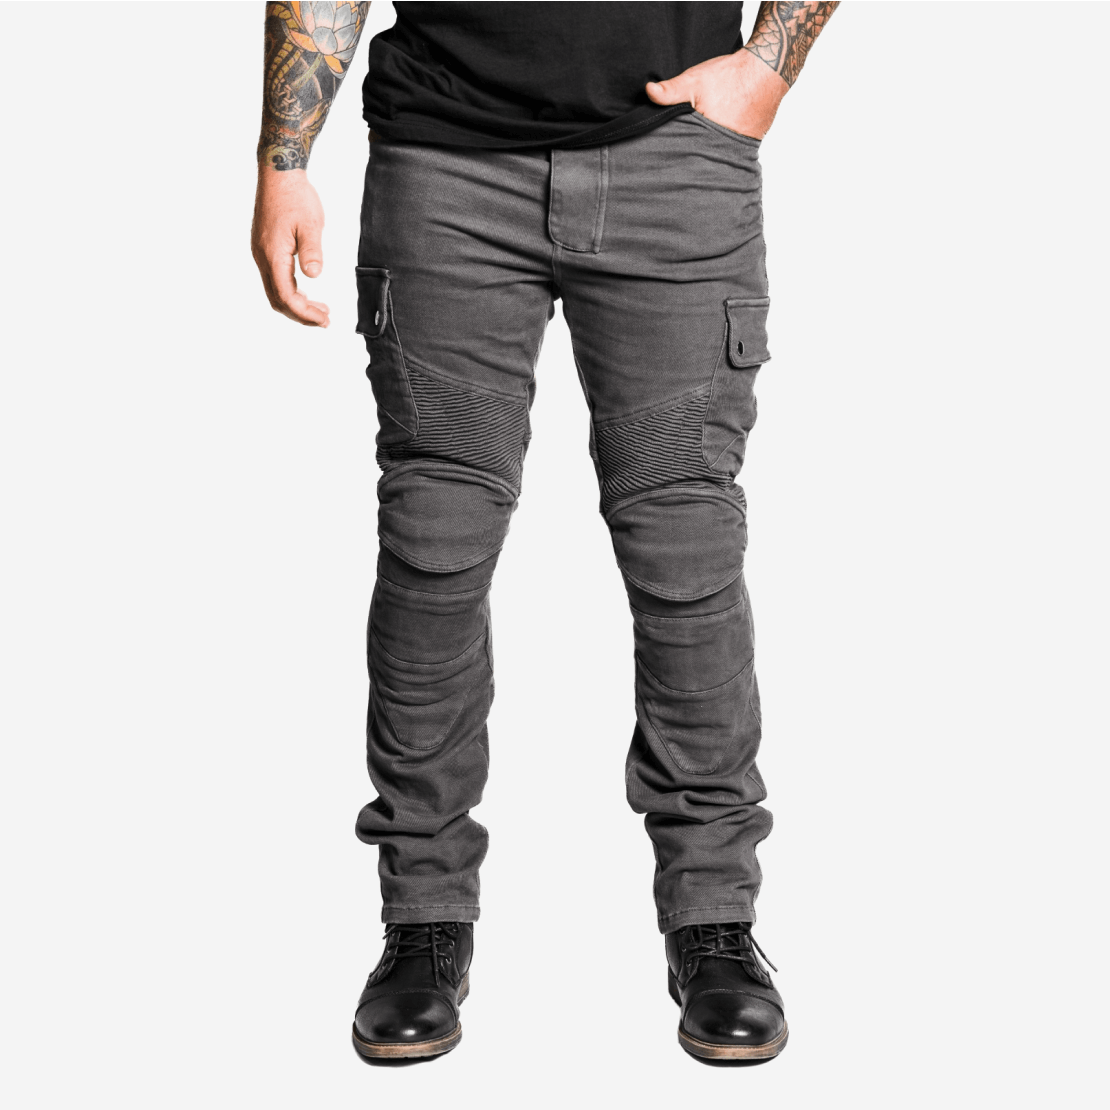 Touring H2Out Spidi 4SEASON Pants Motorcycle Trousers Black Grgio For Sale  Online - Outletmoto.eu